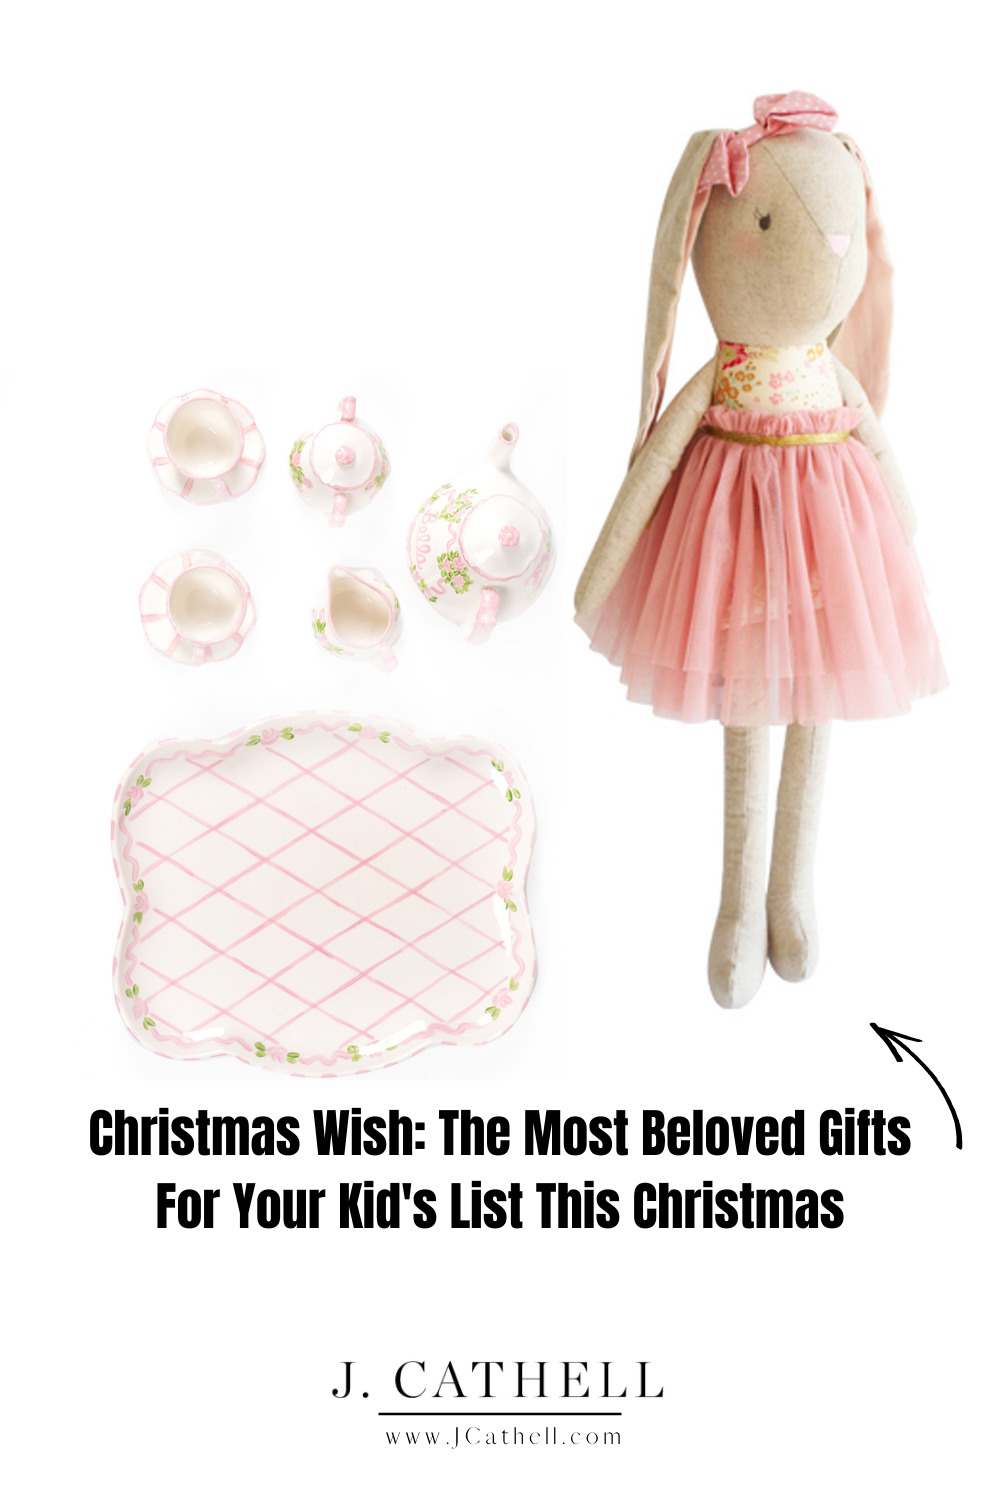 Christmas Gifts For Kids Quality Presents For Ages 410  J. Cathell